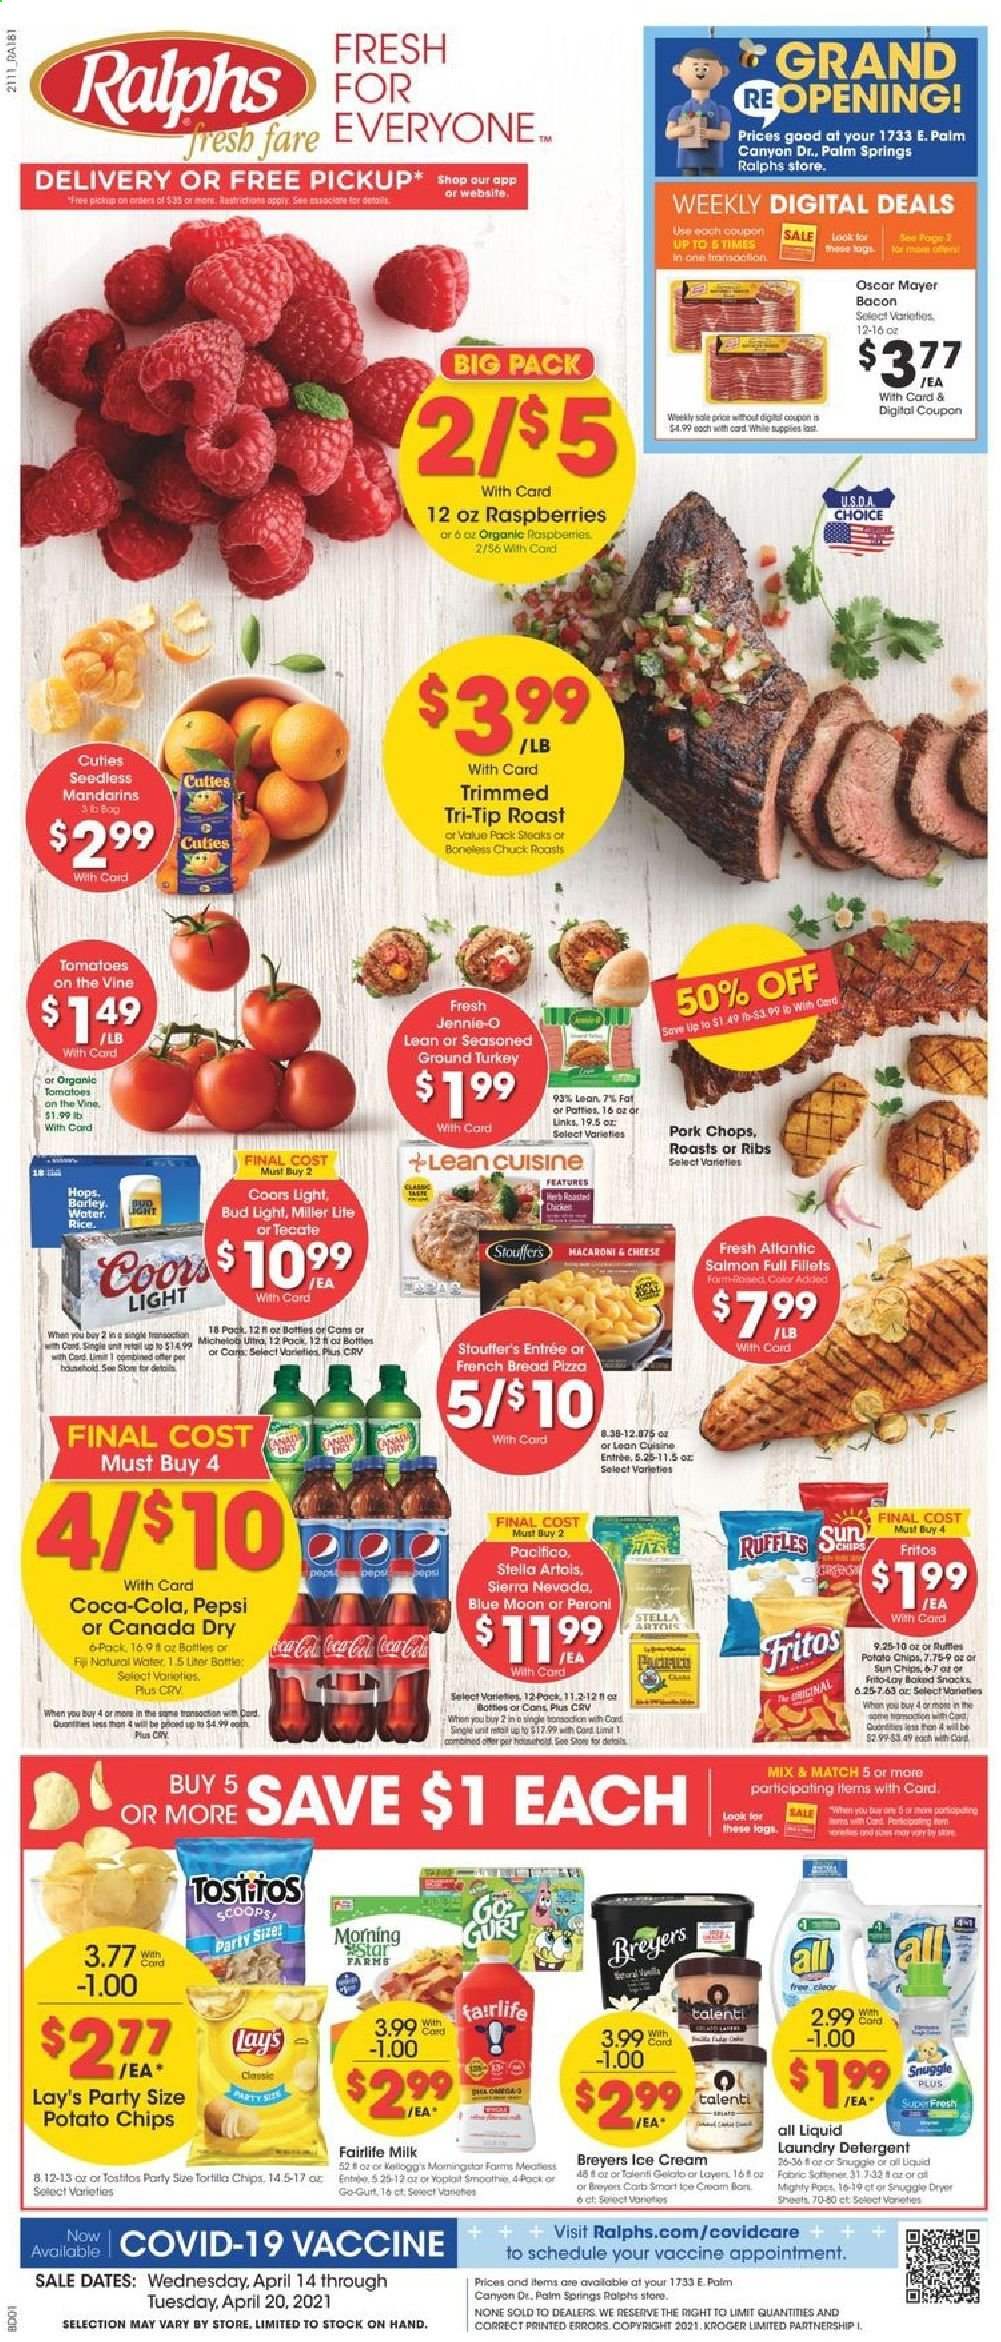 thumbnail - Ralphs Flyer - 04/14/2021 - 04/20/2021 - Sales products - bread, tomatoes, mandarines, raspberries, salmon, pizza, Lean Cuisine, bacon, Oscar Mayer, milk, ice cream, Talenti Gelato, gelato, Stouffer's, snack, Fritos, potato chips, chips, Lay’s, rice, Canada Dry, Coca-Cola, Pepsi, beer, Miller Lite, Stella Artois, Coors, Blue Moon, Michelob, Bud Light, Peroni, ground turkey, pork chops, pork meat, detergent, Snuggle, laundry detergent. Page 1.